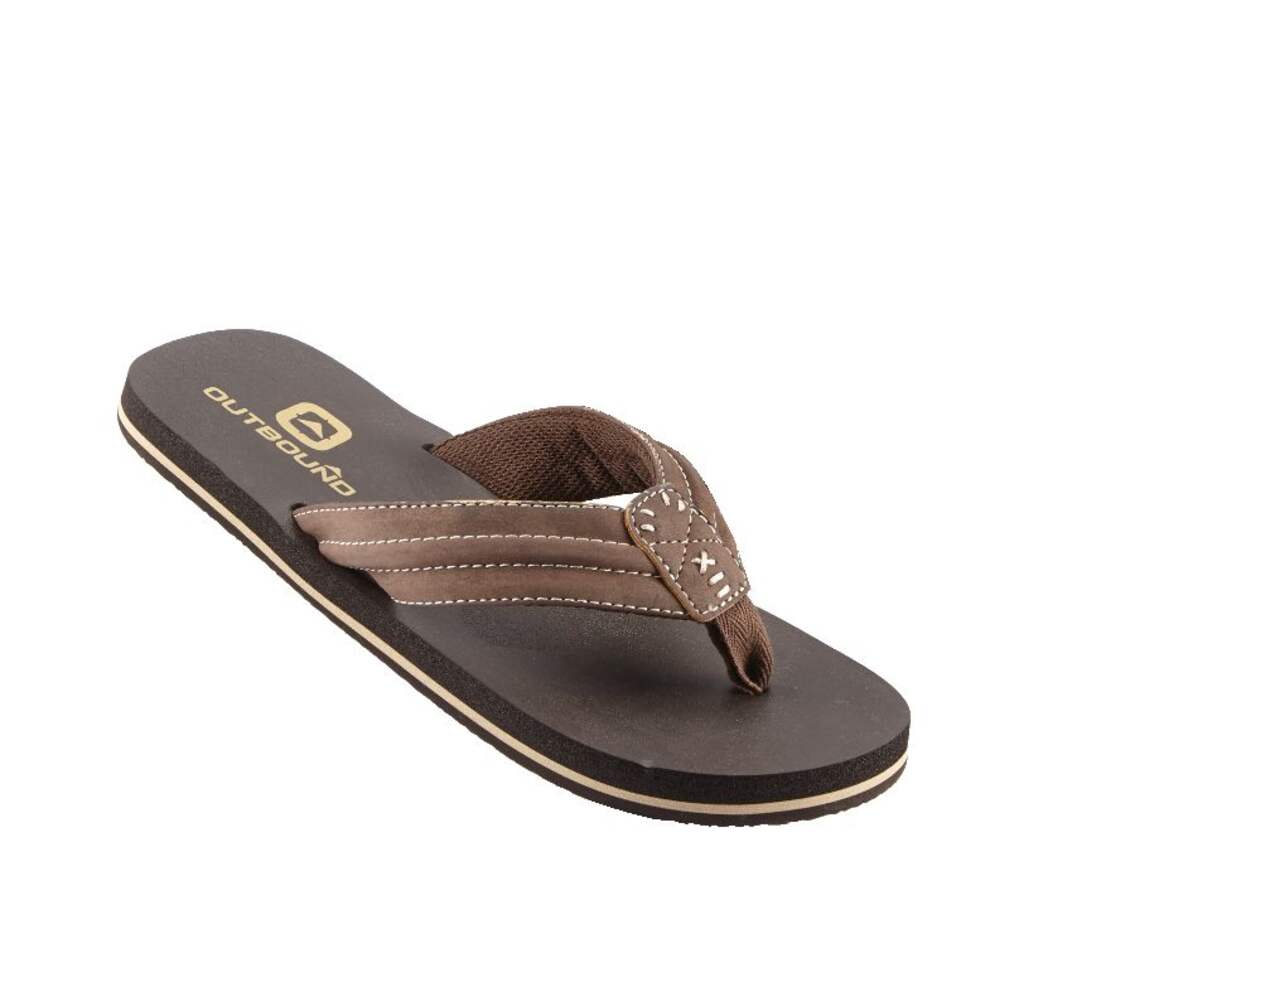 Outbound Men's Rogers Flip Flops/Sandals with Comfortable Footbed, Brown